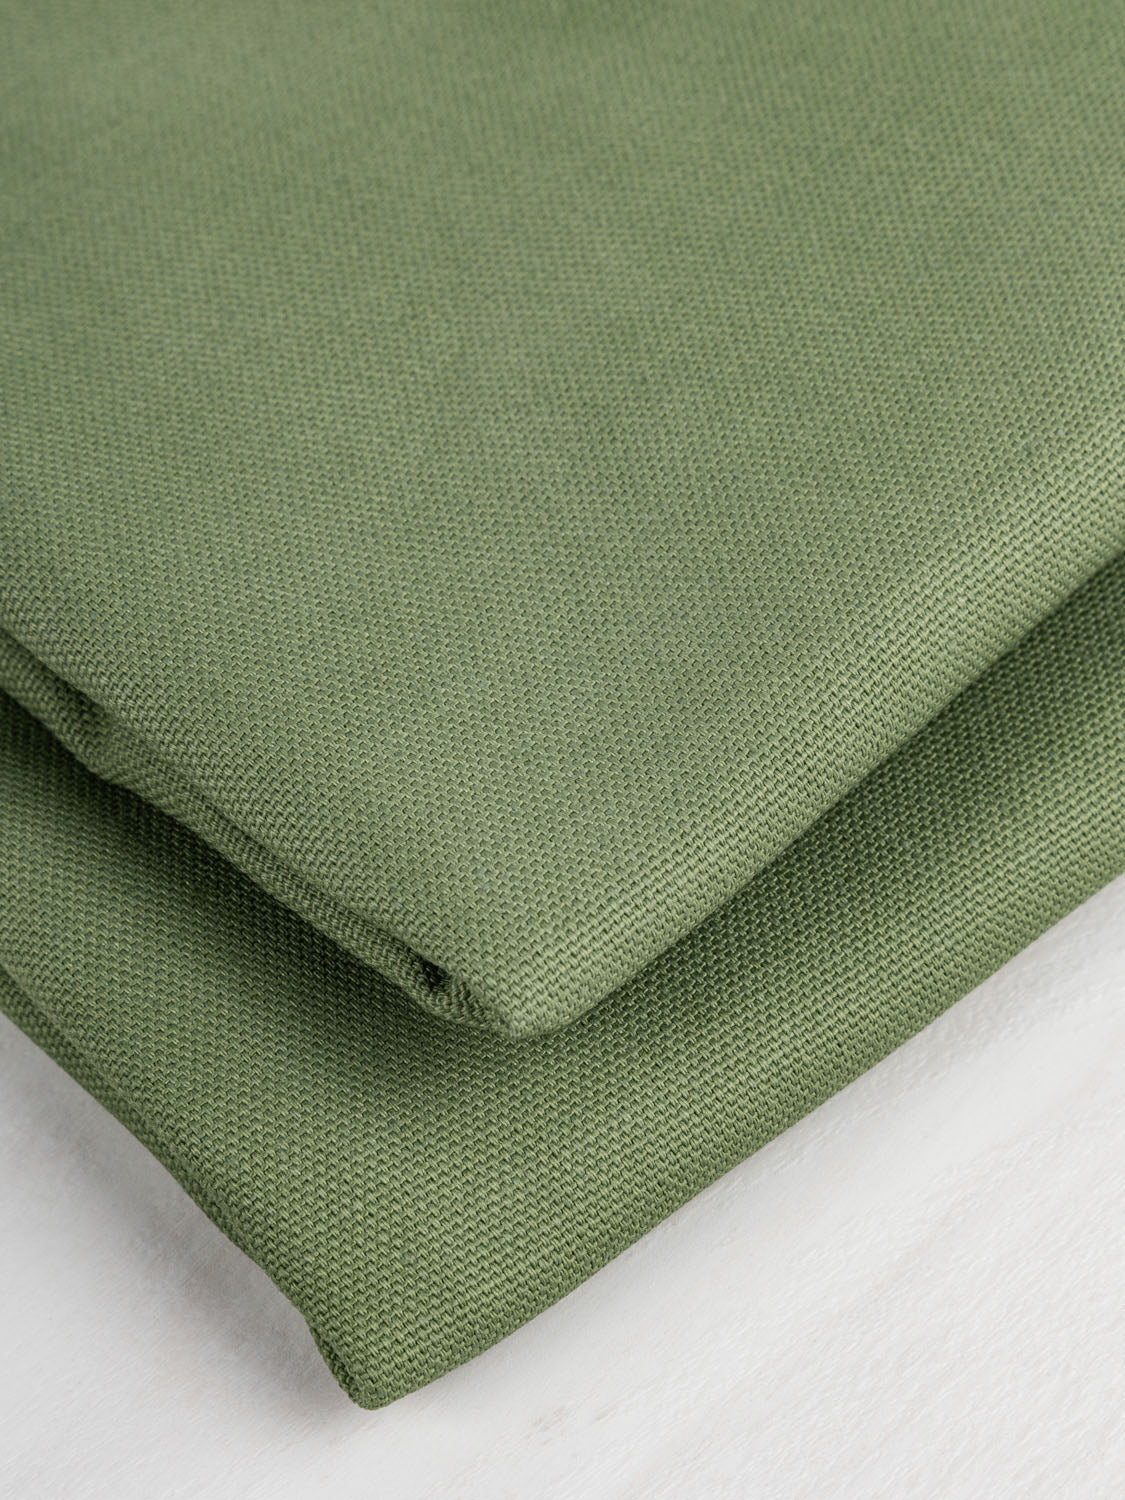 Is Canvas Fabric Eco-Friendly?